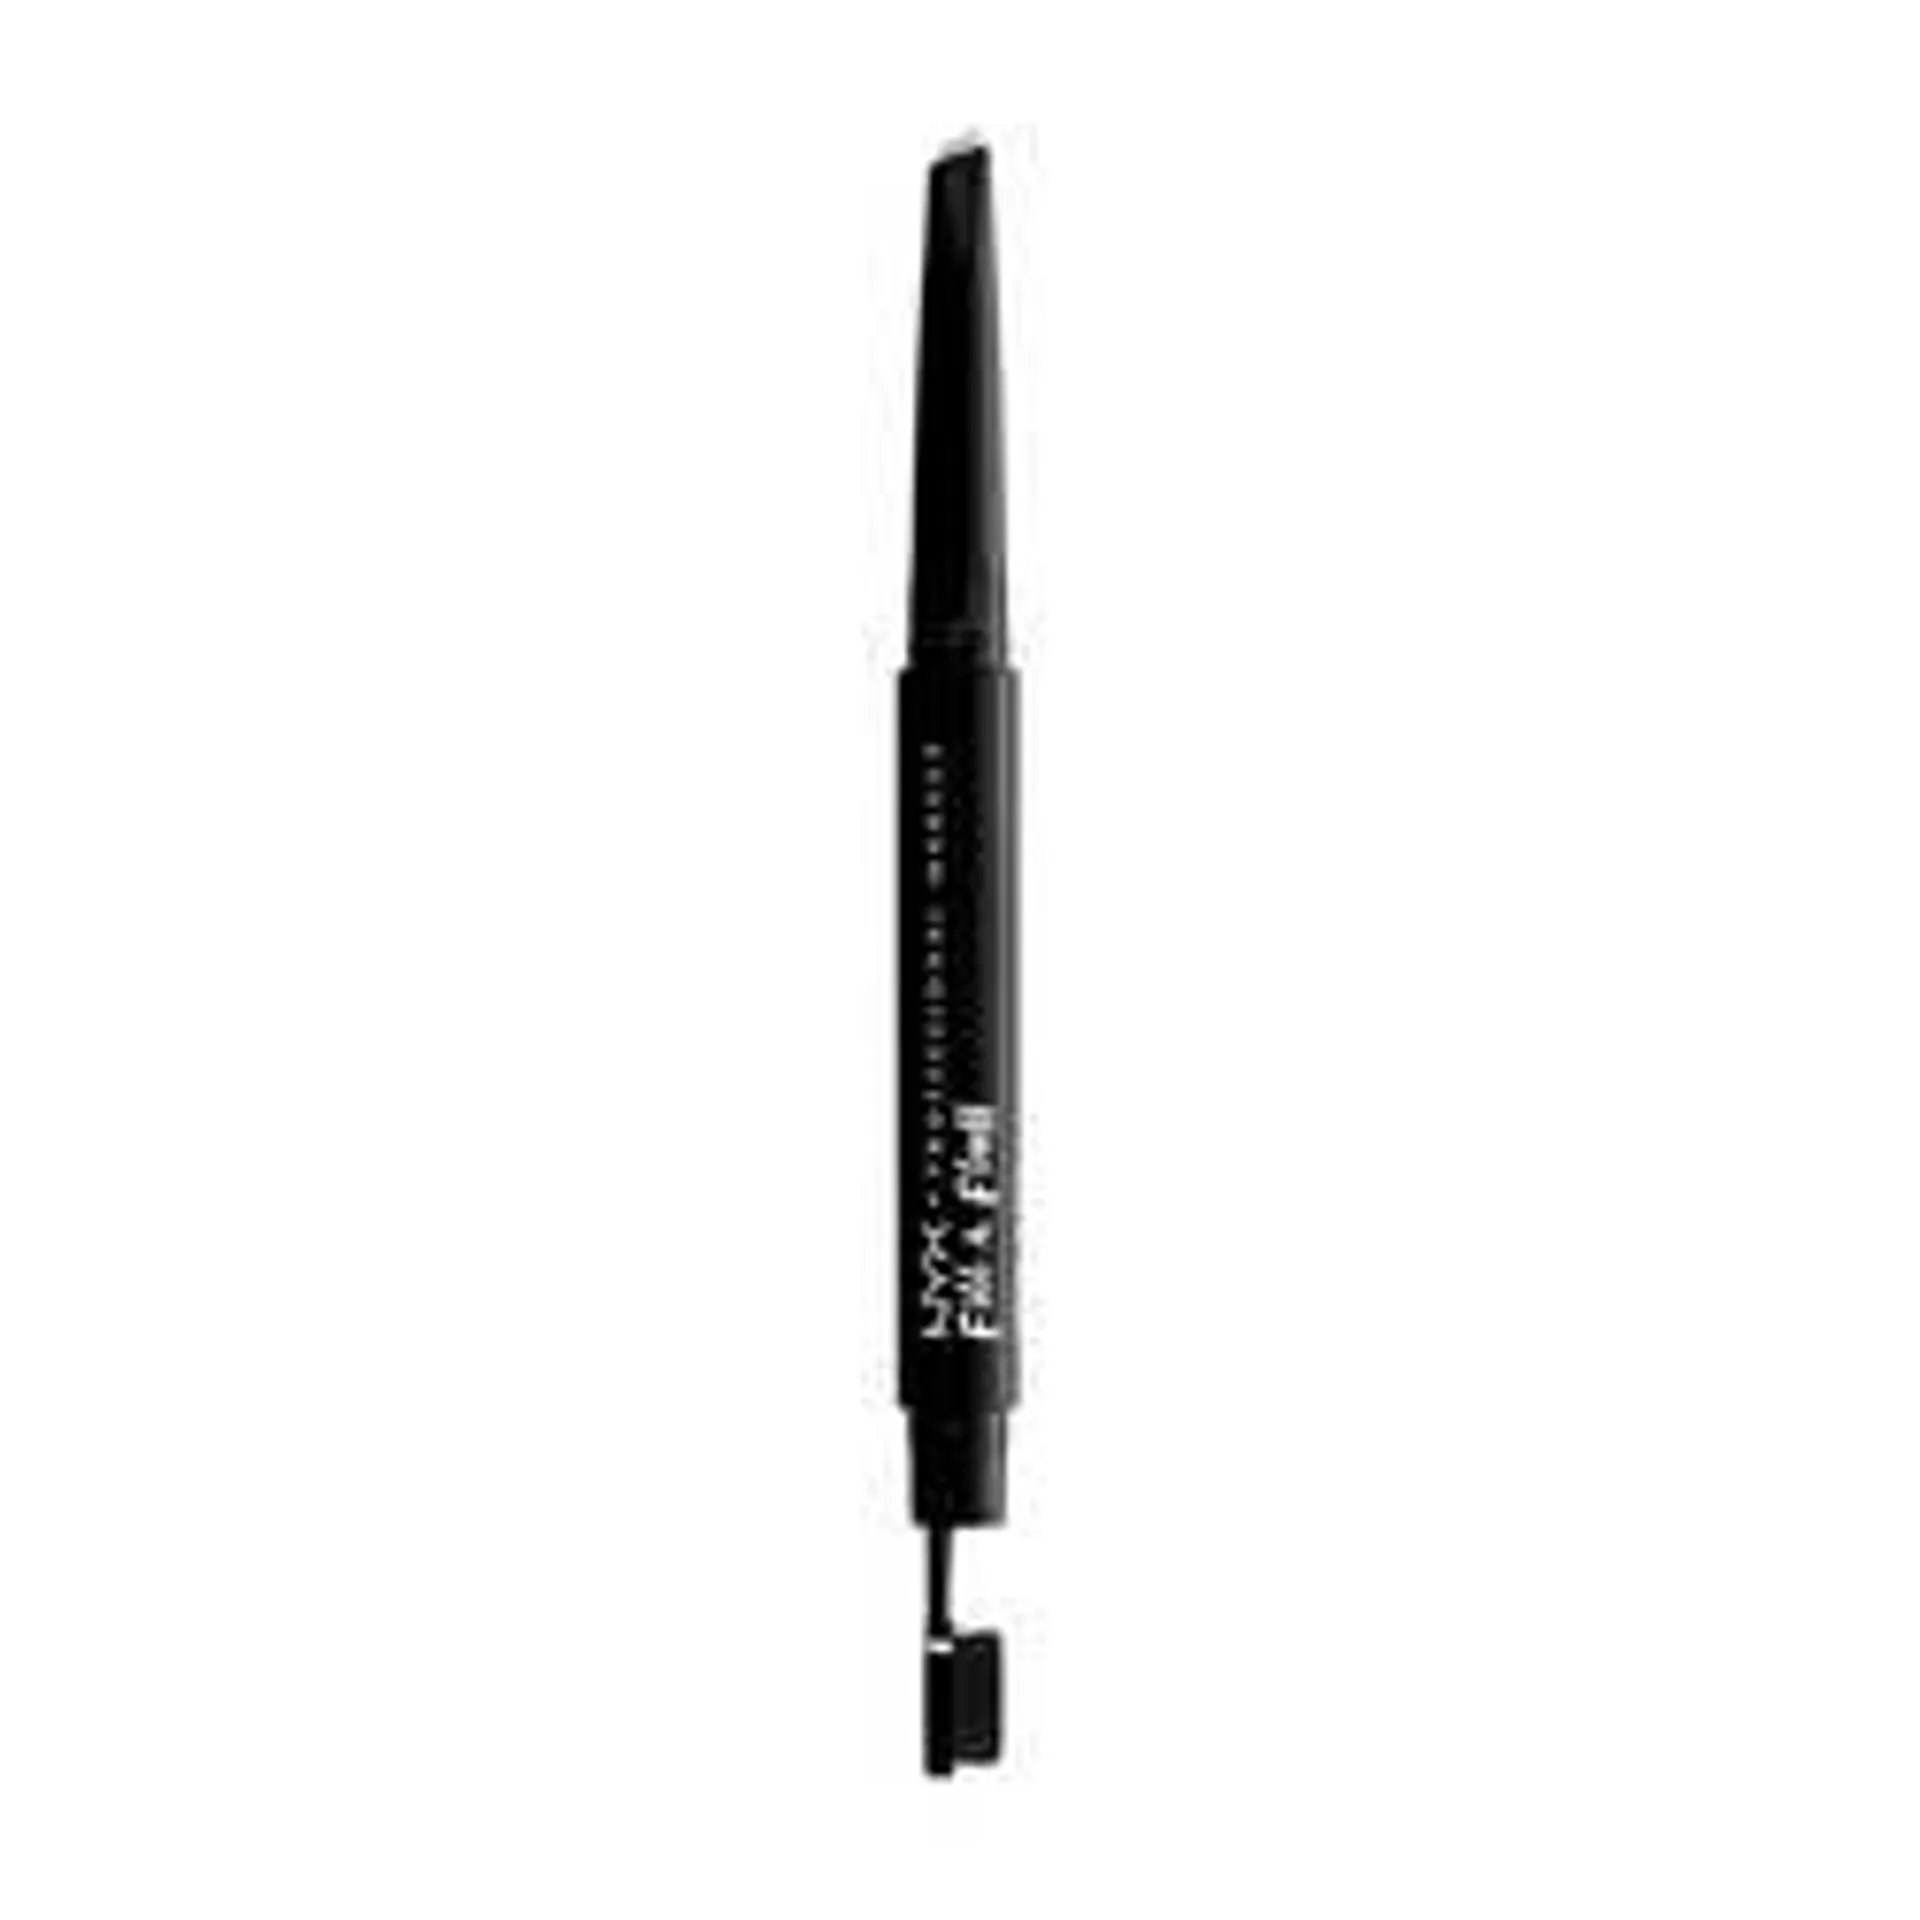 Fill & Fluff Clear Brow Pomade Pencil